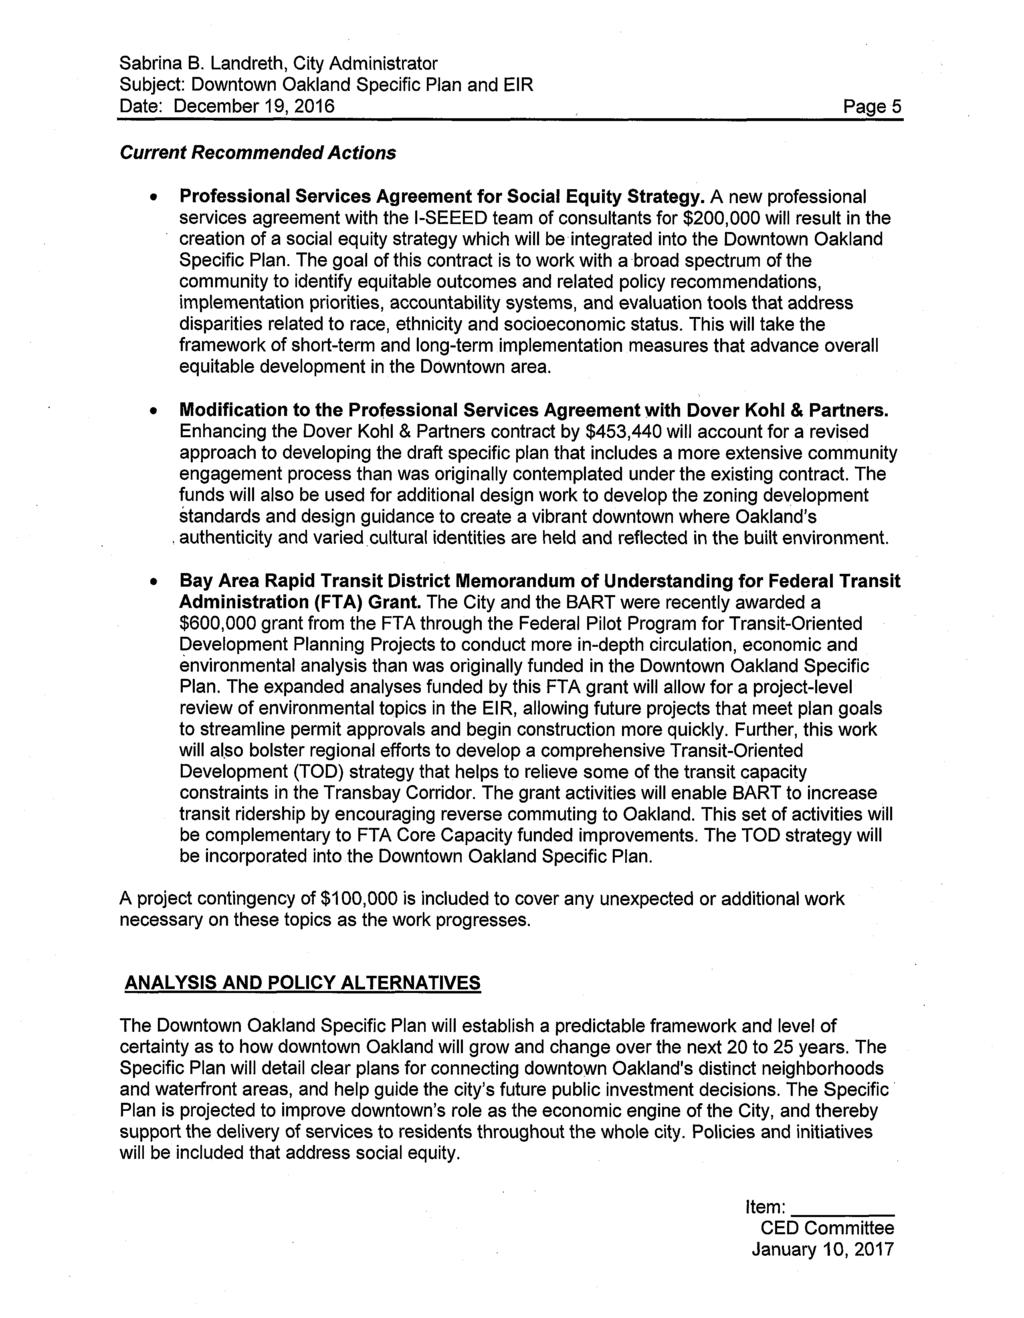 Sabriria B. Landreth, City Administrator Date: December 19, 2016 Page 5 Current Recommended Actions Professional Services Agreement for Social Equity Strategy.